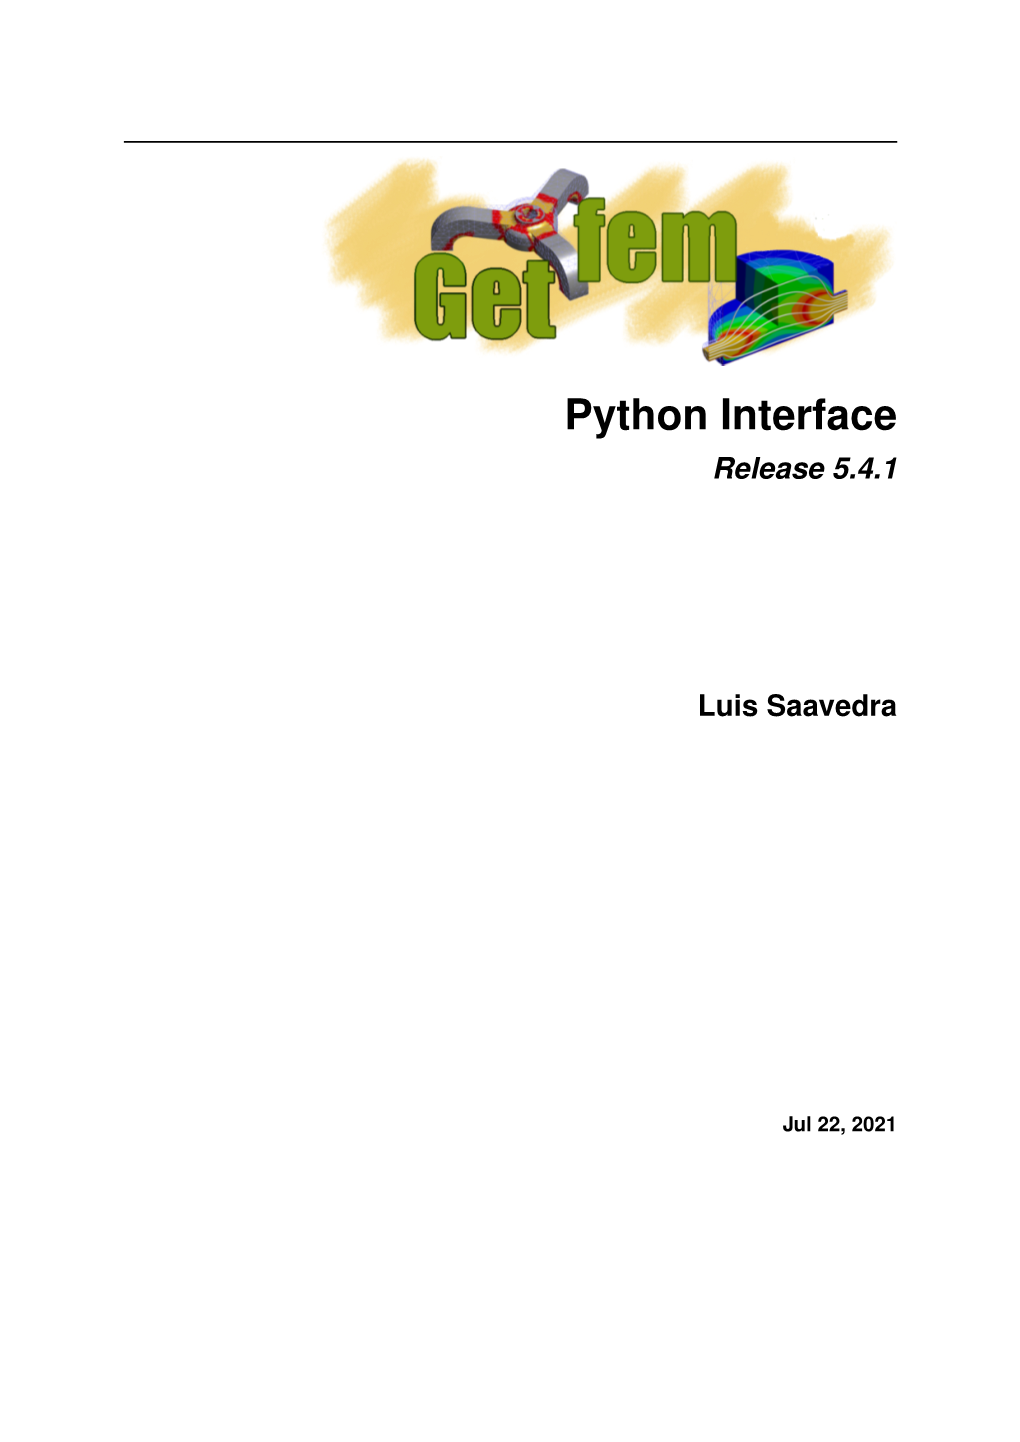 Python Interface Release 5.4.1